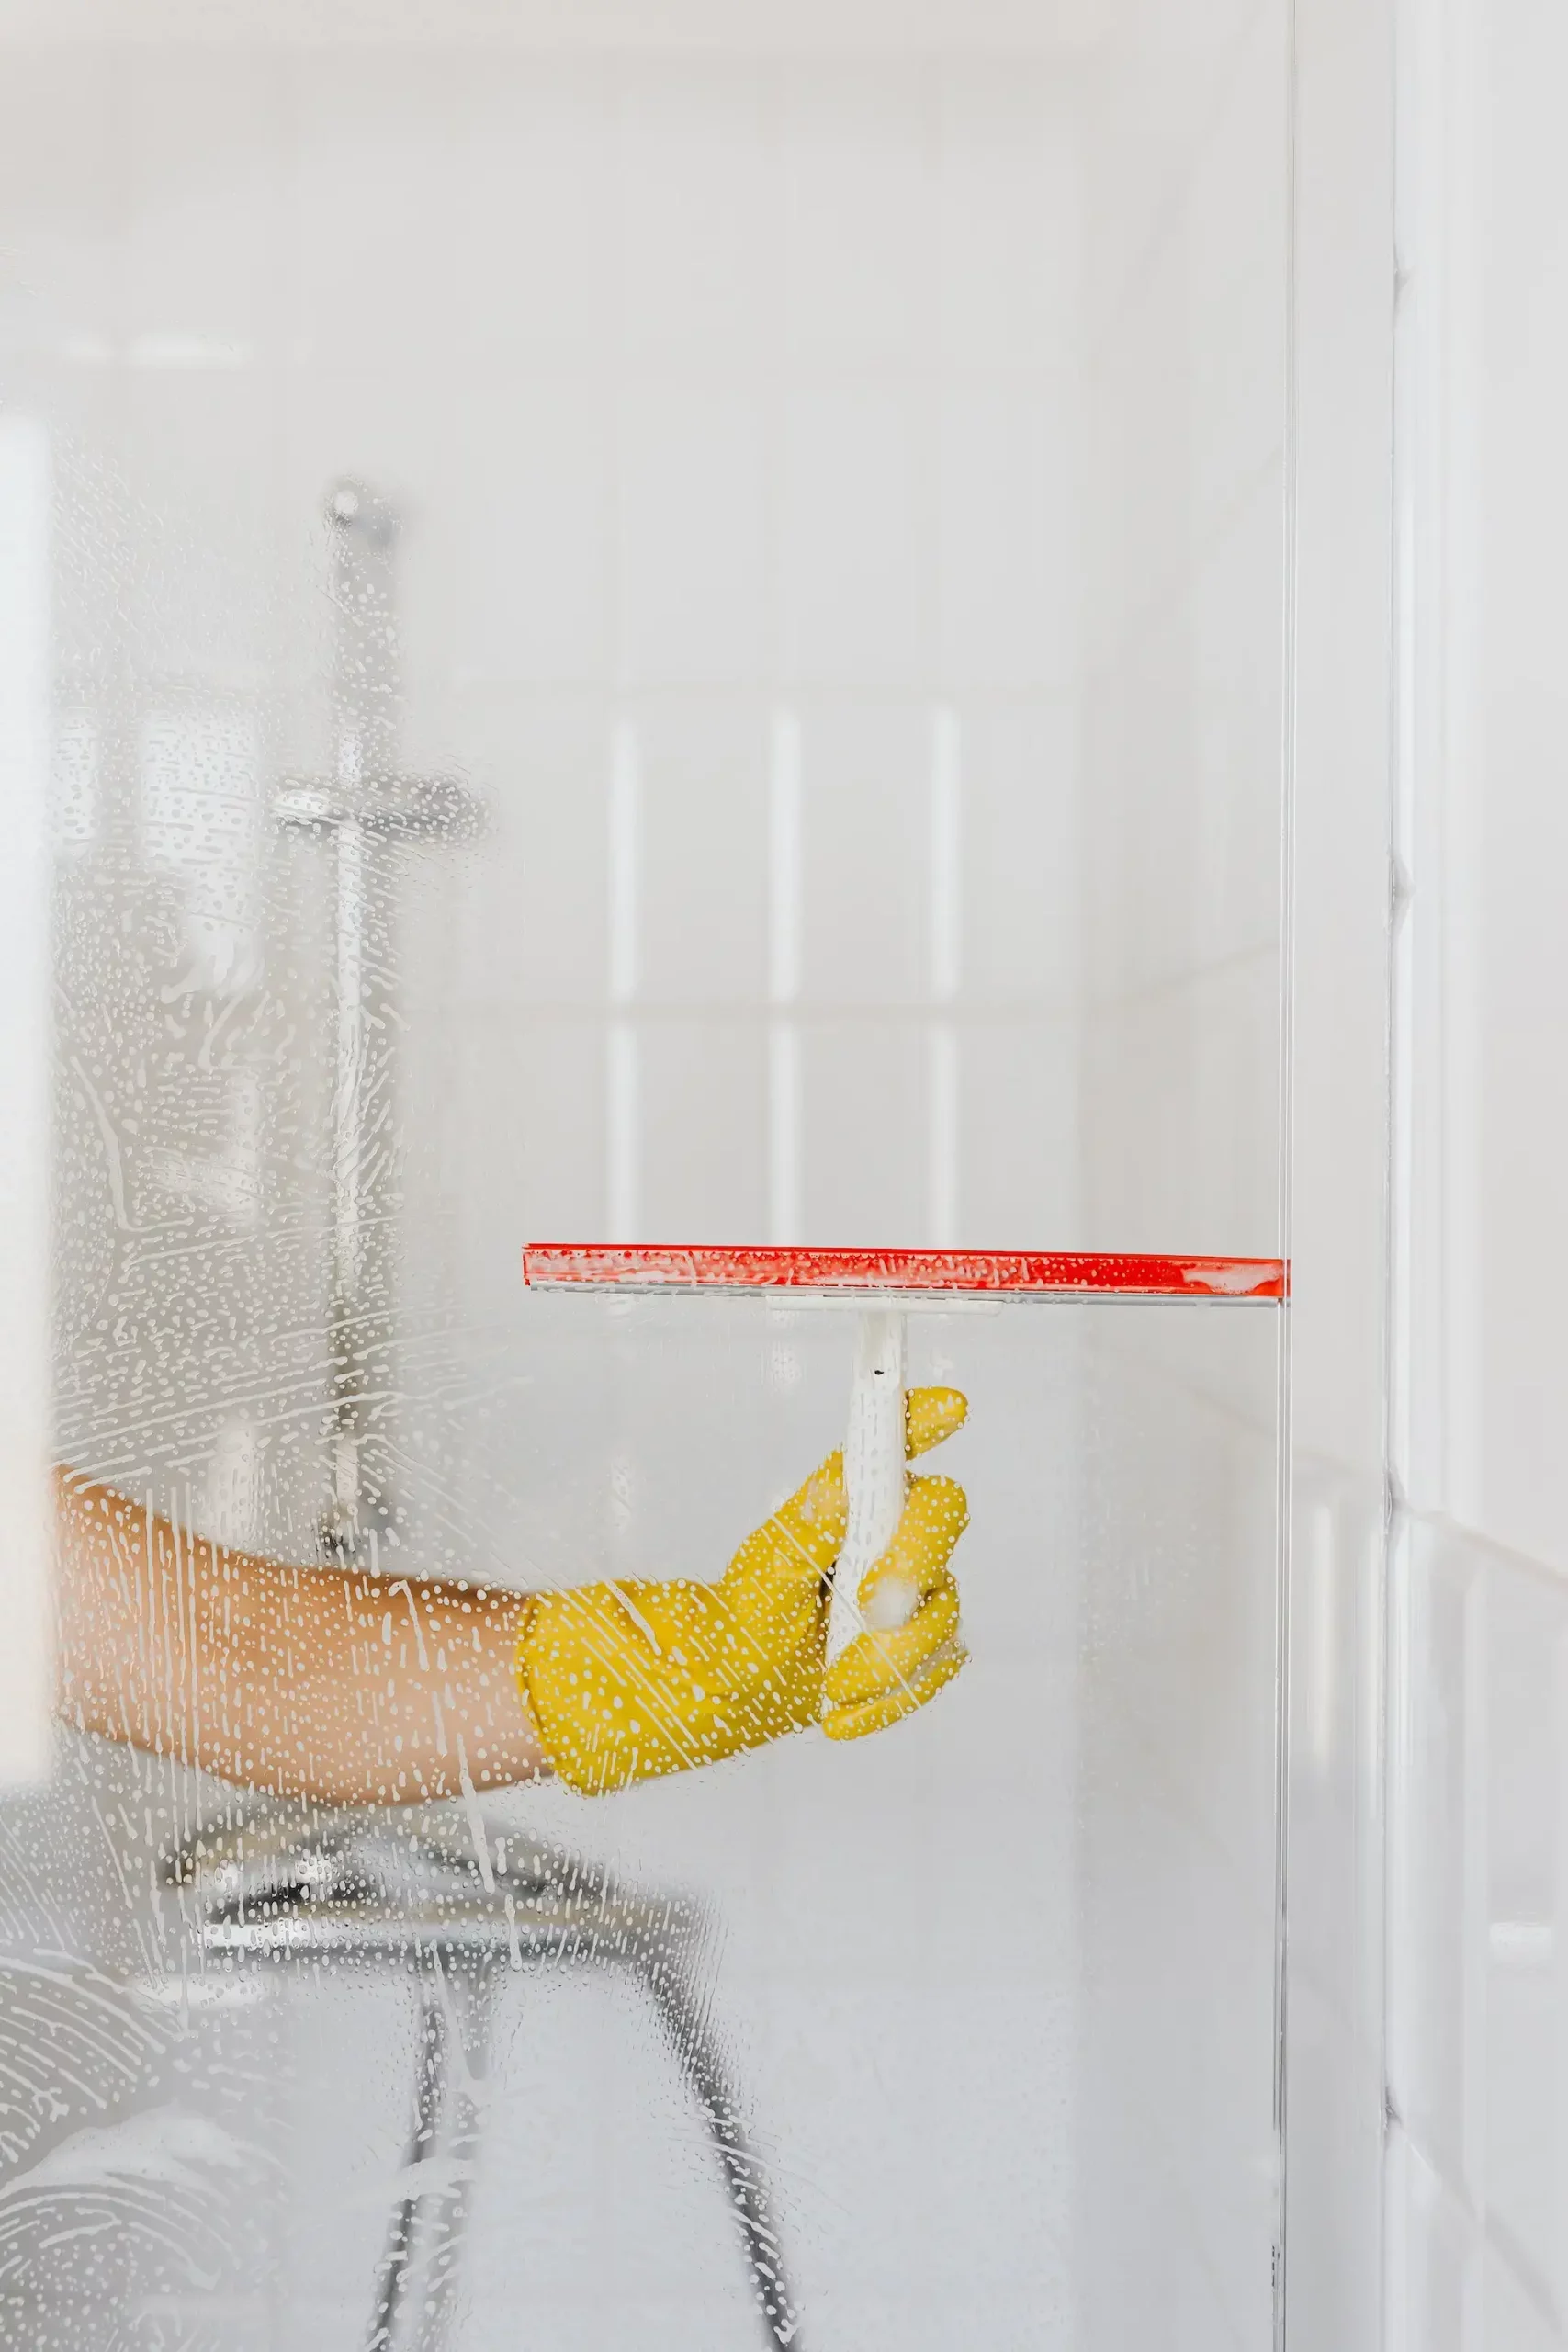 How To Use a Shower Squeegee for Maximum Efficiency - DIY House